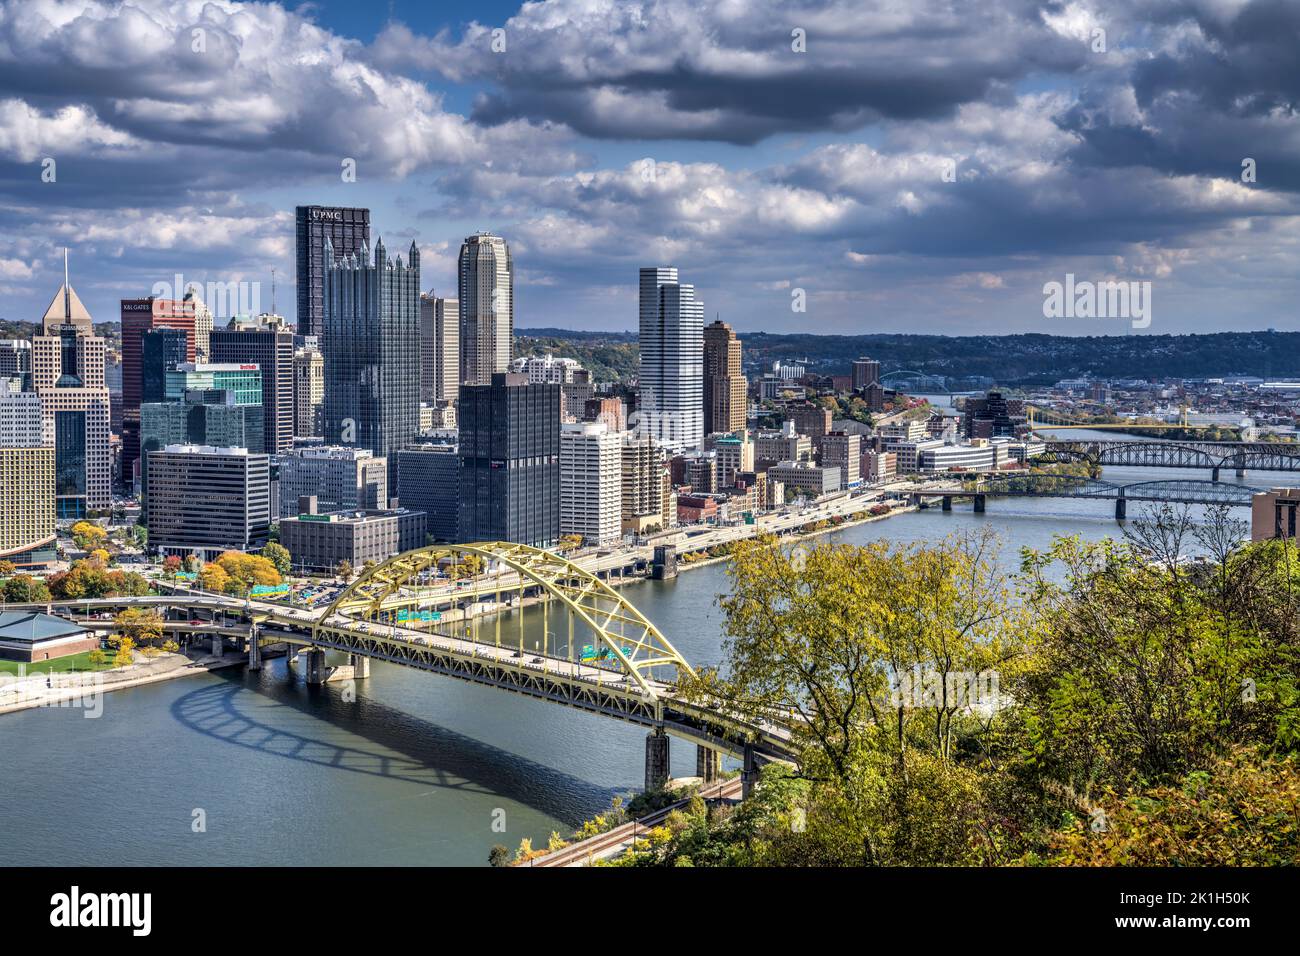 View of the Pittsburgh “Golden Triangle”  with the Fort Duquesne Bridge from the Duquesne Incline Upper Station in Pittsburgh, Pennsylvania. Stock Photo